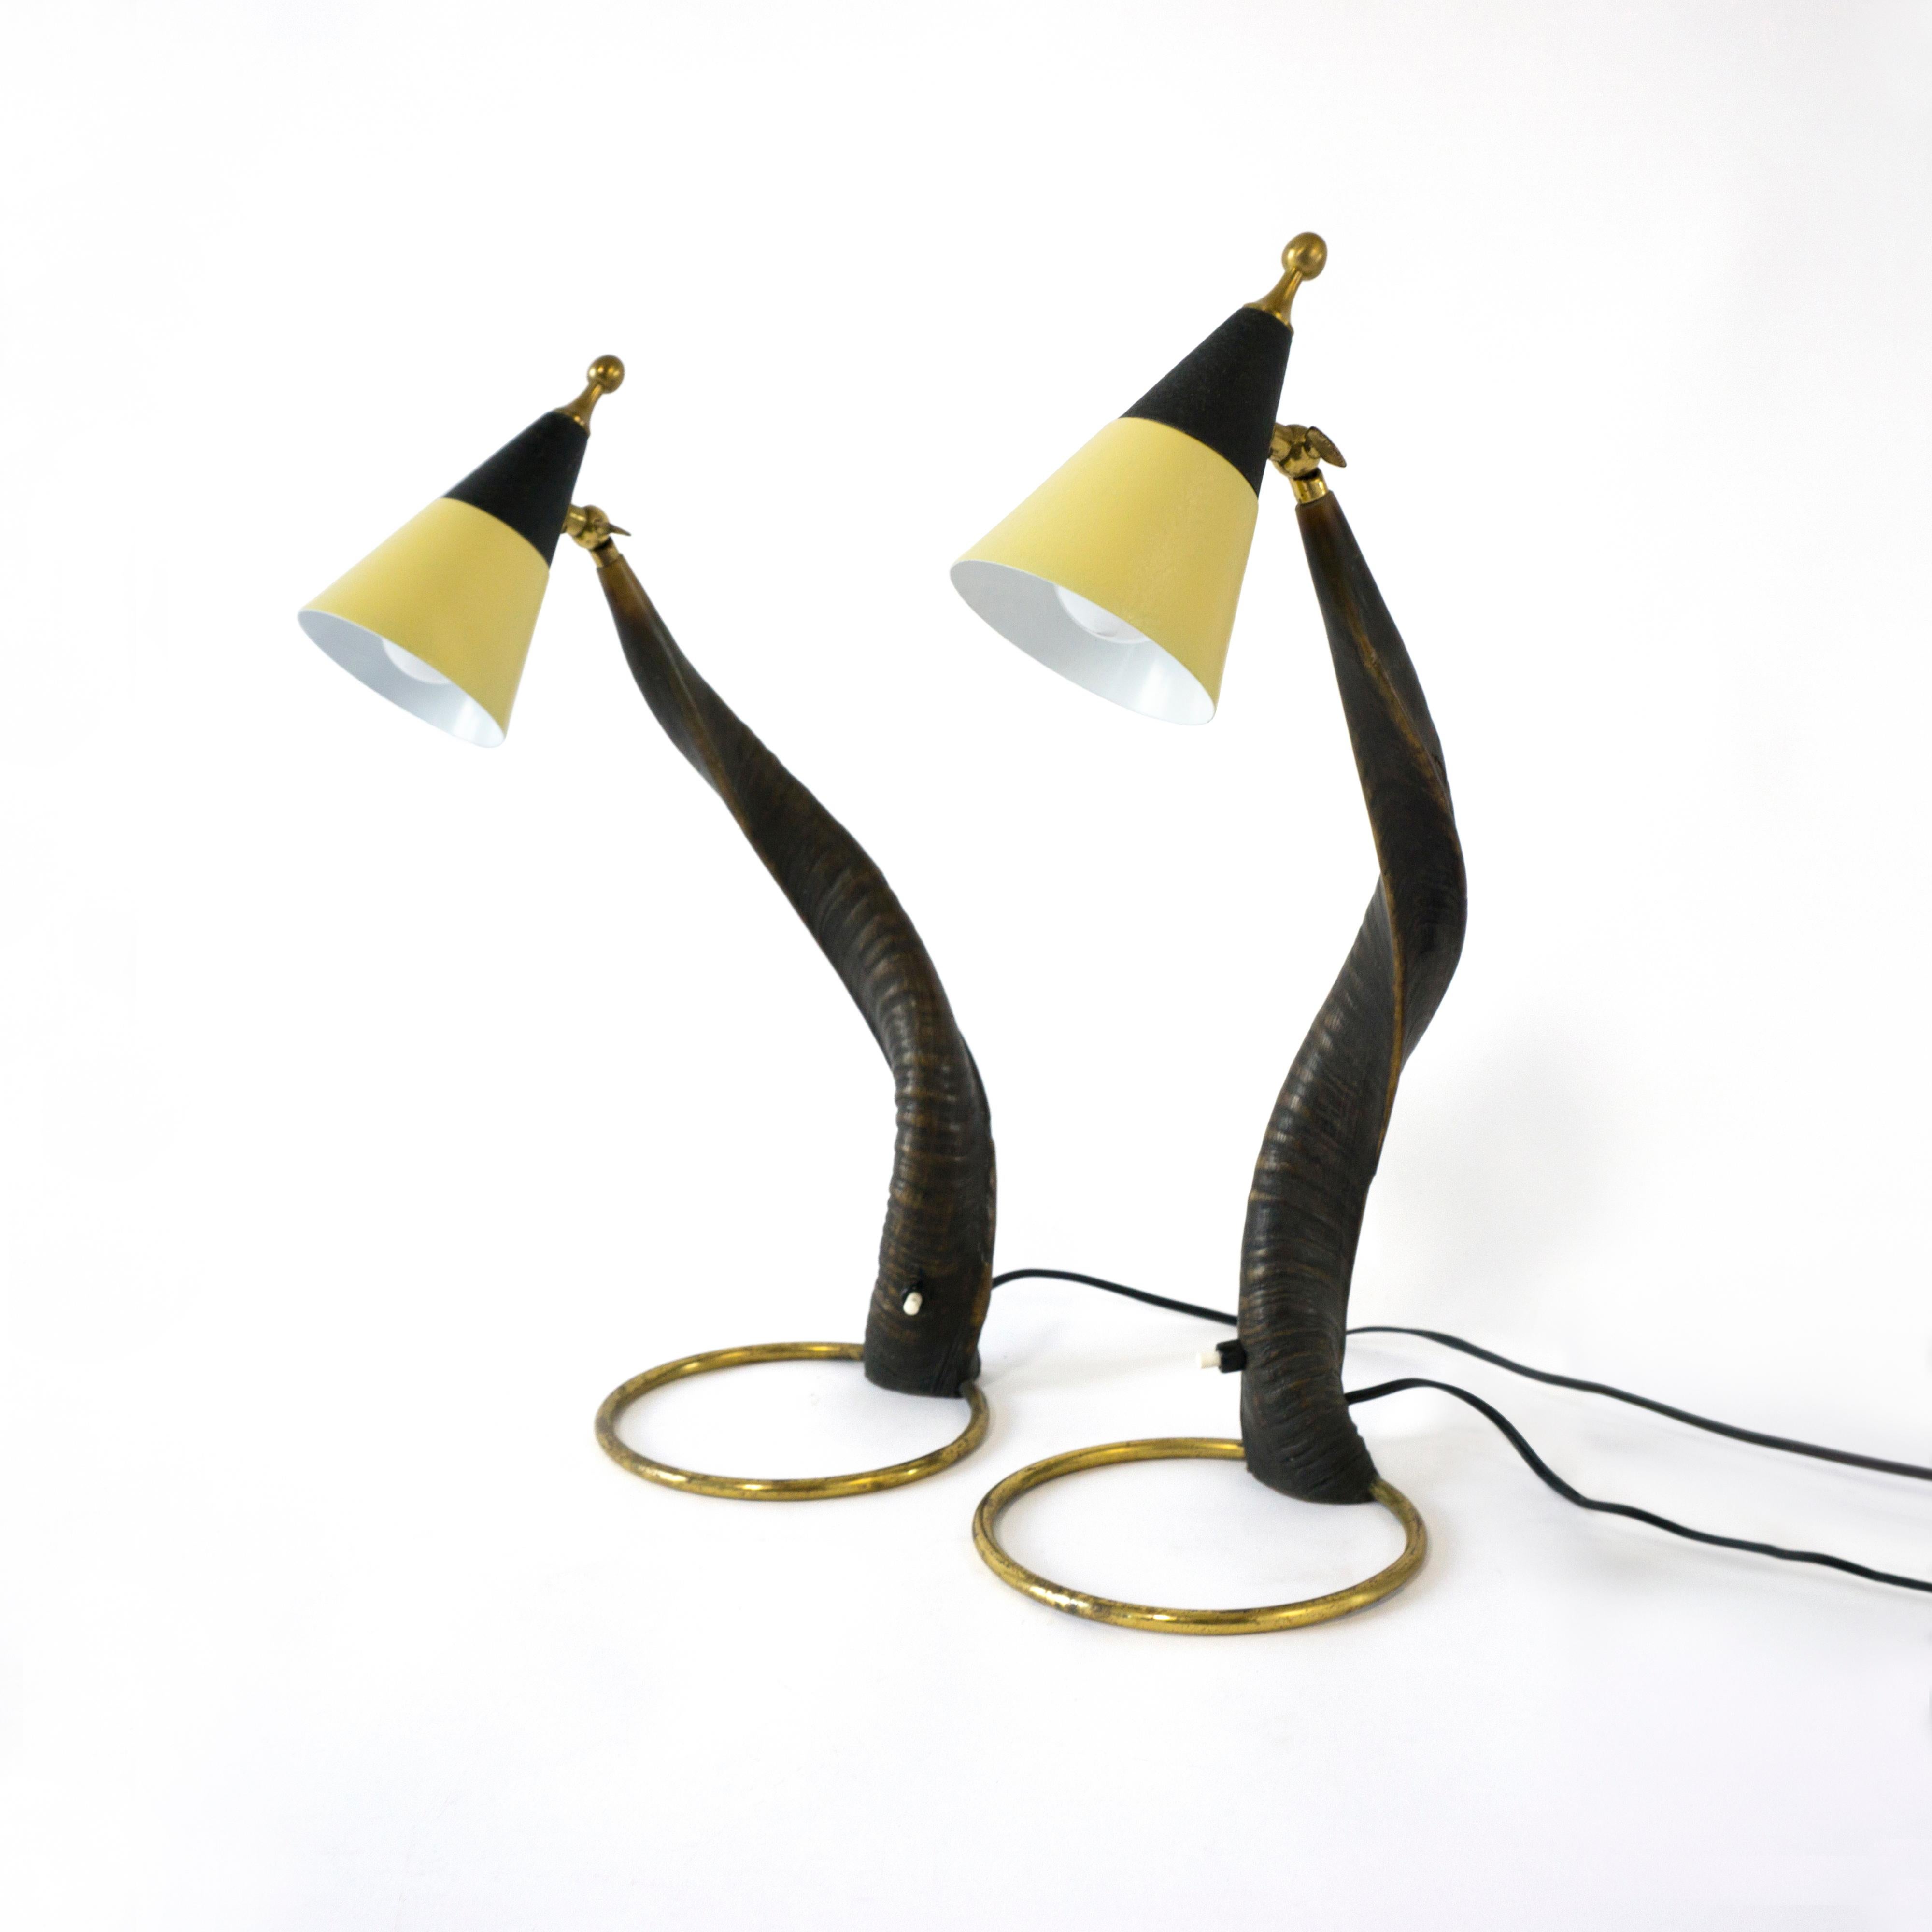 The beautifully grown, twisted horn forms the base of these exceptional table lamps from the 1950s. 
The curved horn sits on a lovely patinated brass ring. The lamps are equipped with an on/off switch, which is located in the horn. The shades made